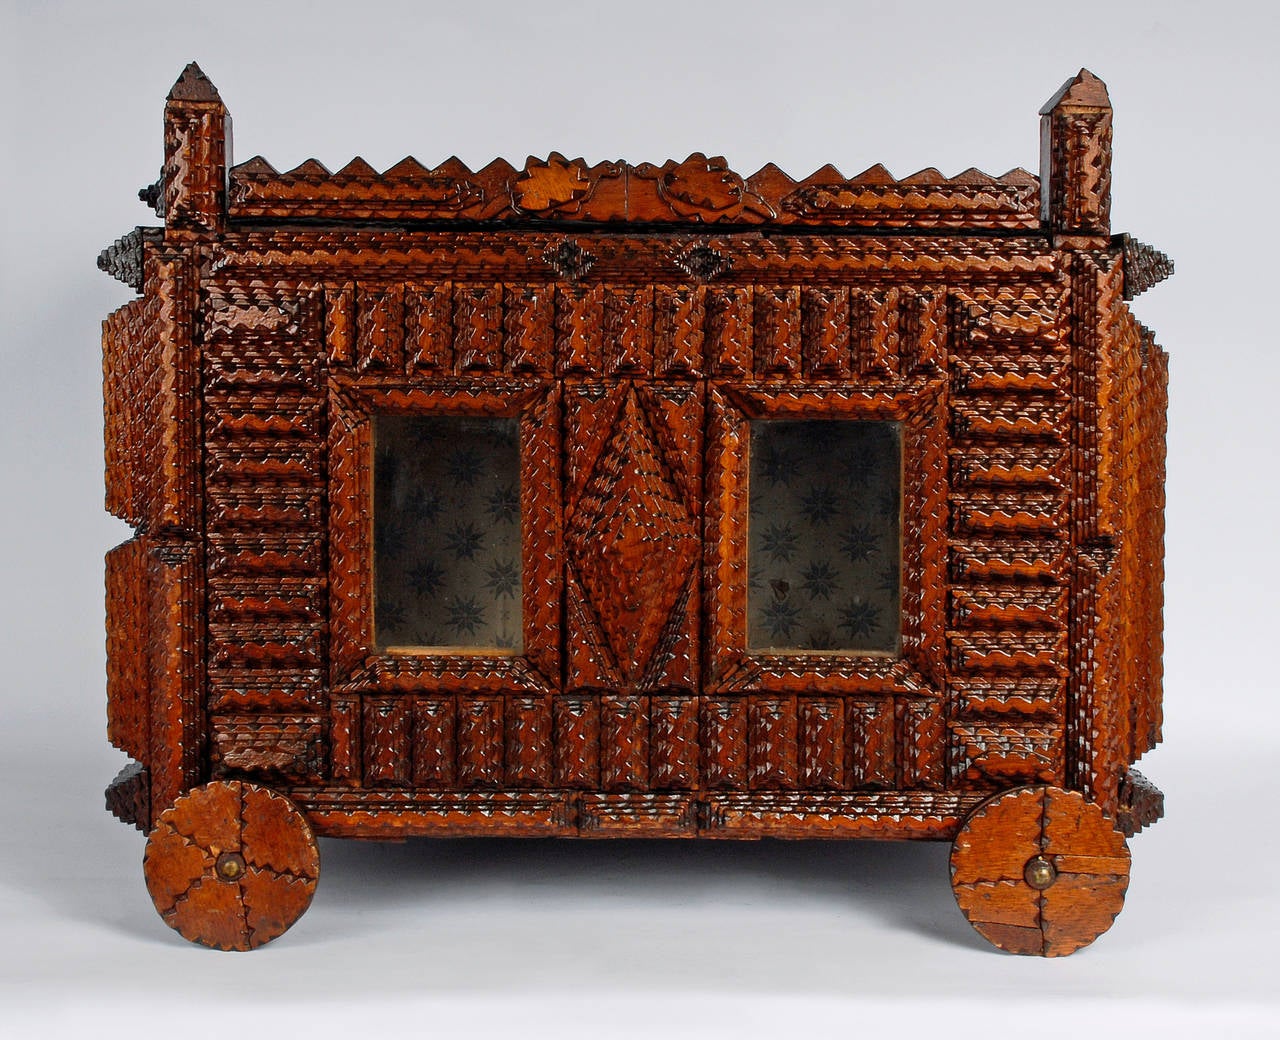 A whimsical tramp art circus wagon. One of the most unusual offerings we have had. The wagon sits on wheels which turn, there are doors on the front and back, and windows on one side. There are a pair of carved turtles with tails and beaded eyes